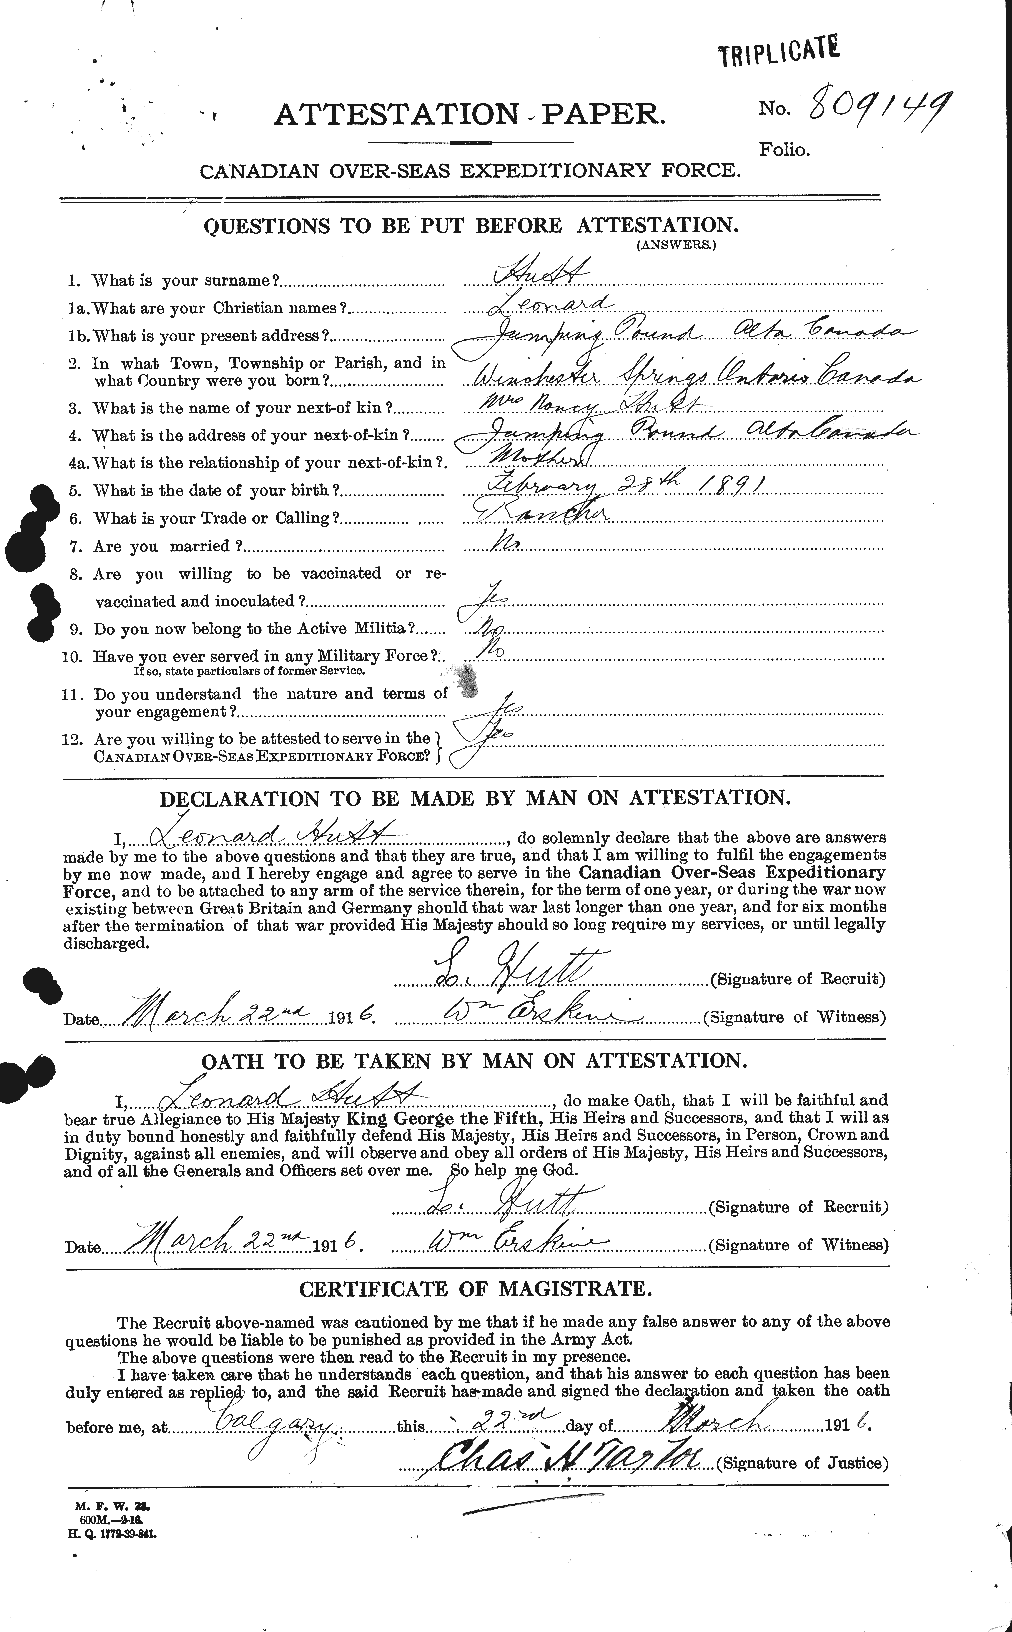 Personnel Records of the First World War - CEF 411947a